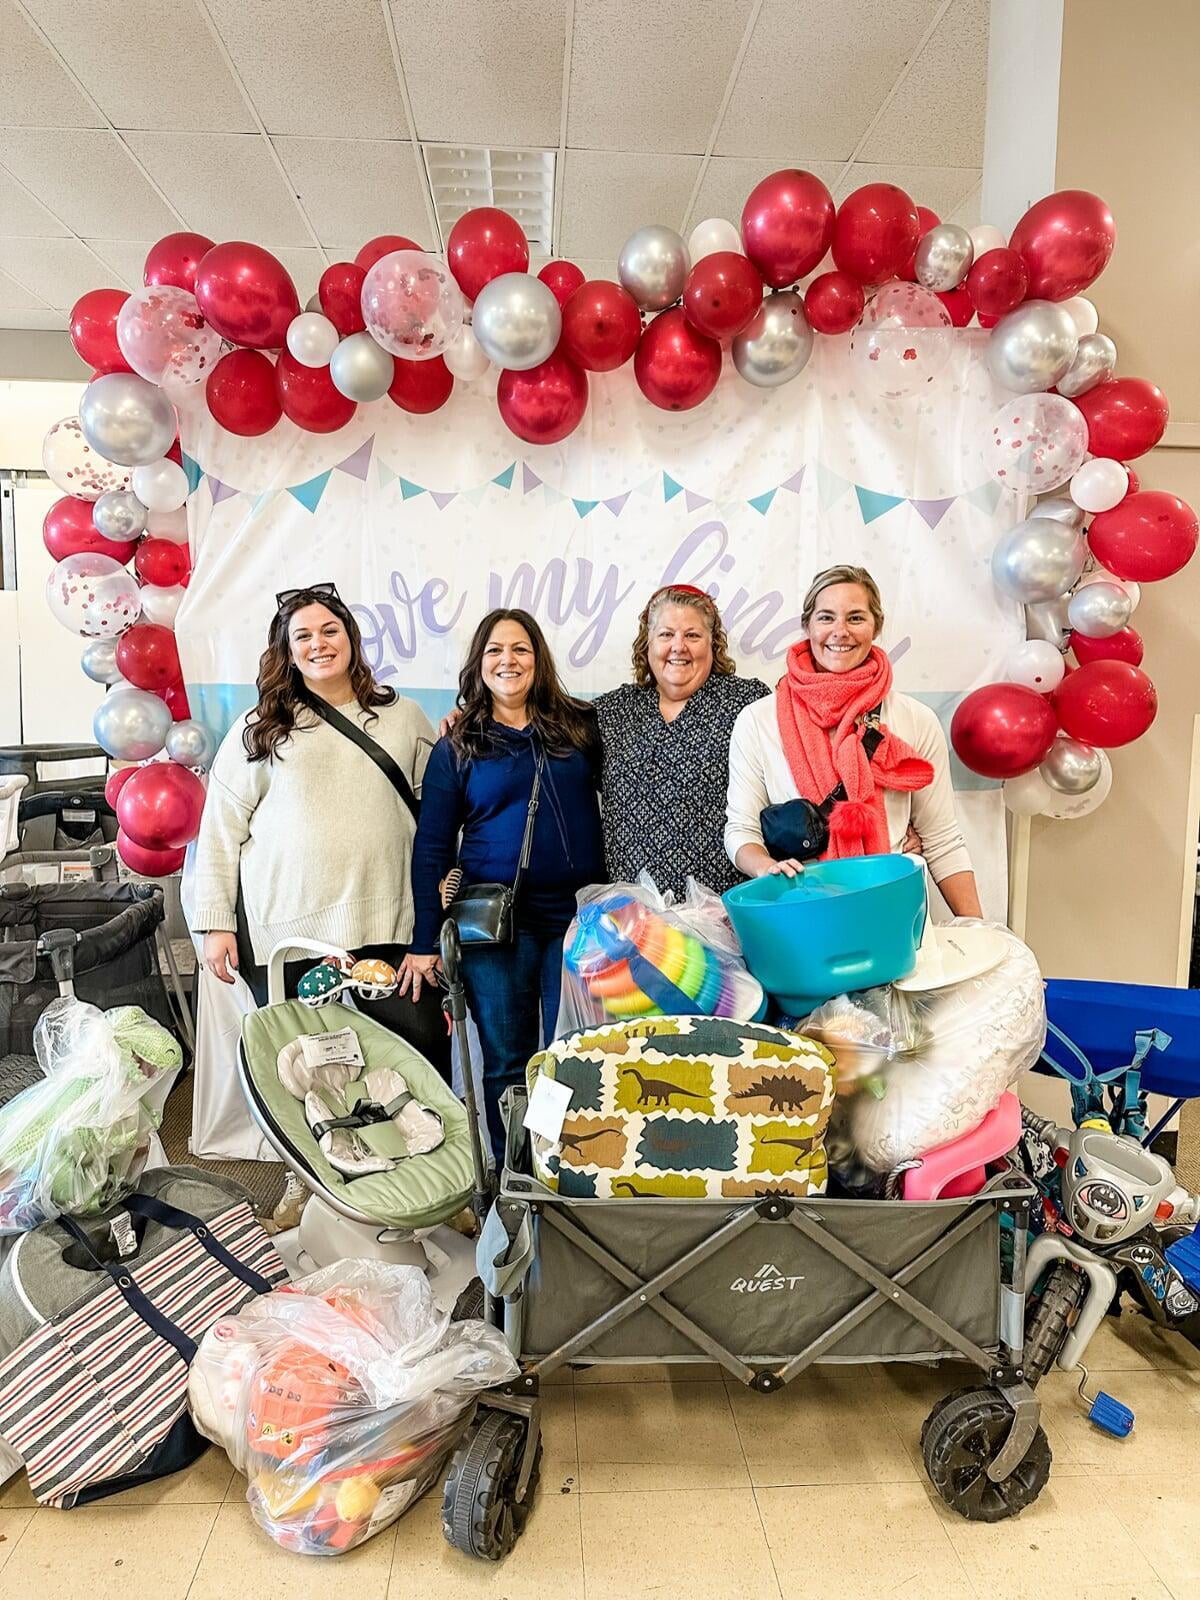 four friends shop together—one mom wears her baby girl—as they find great deals at their local JBF sale.